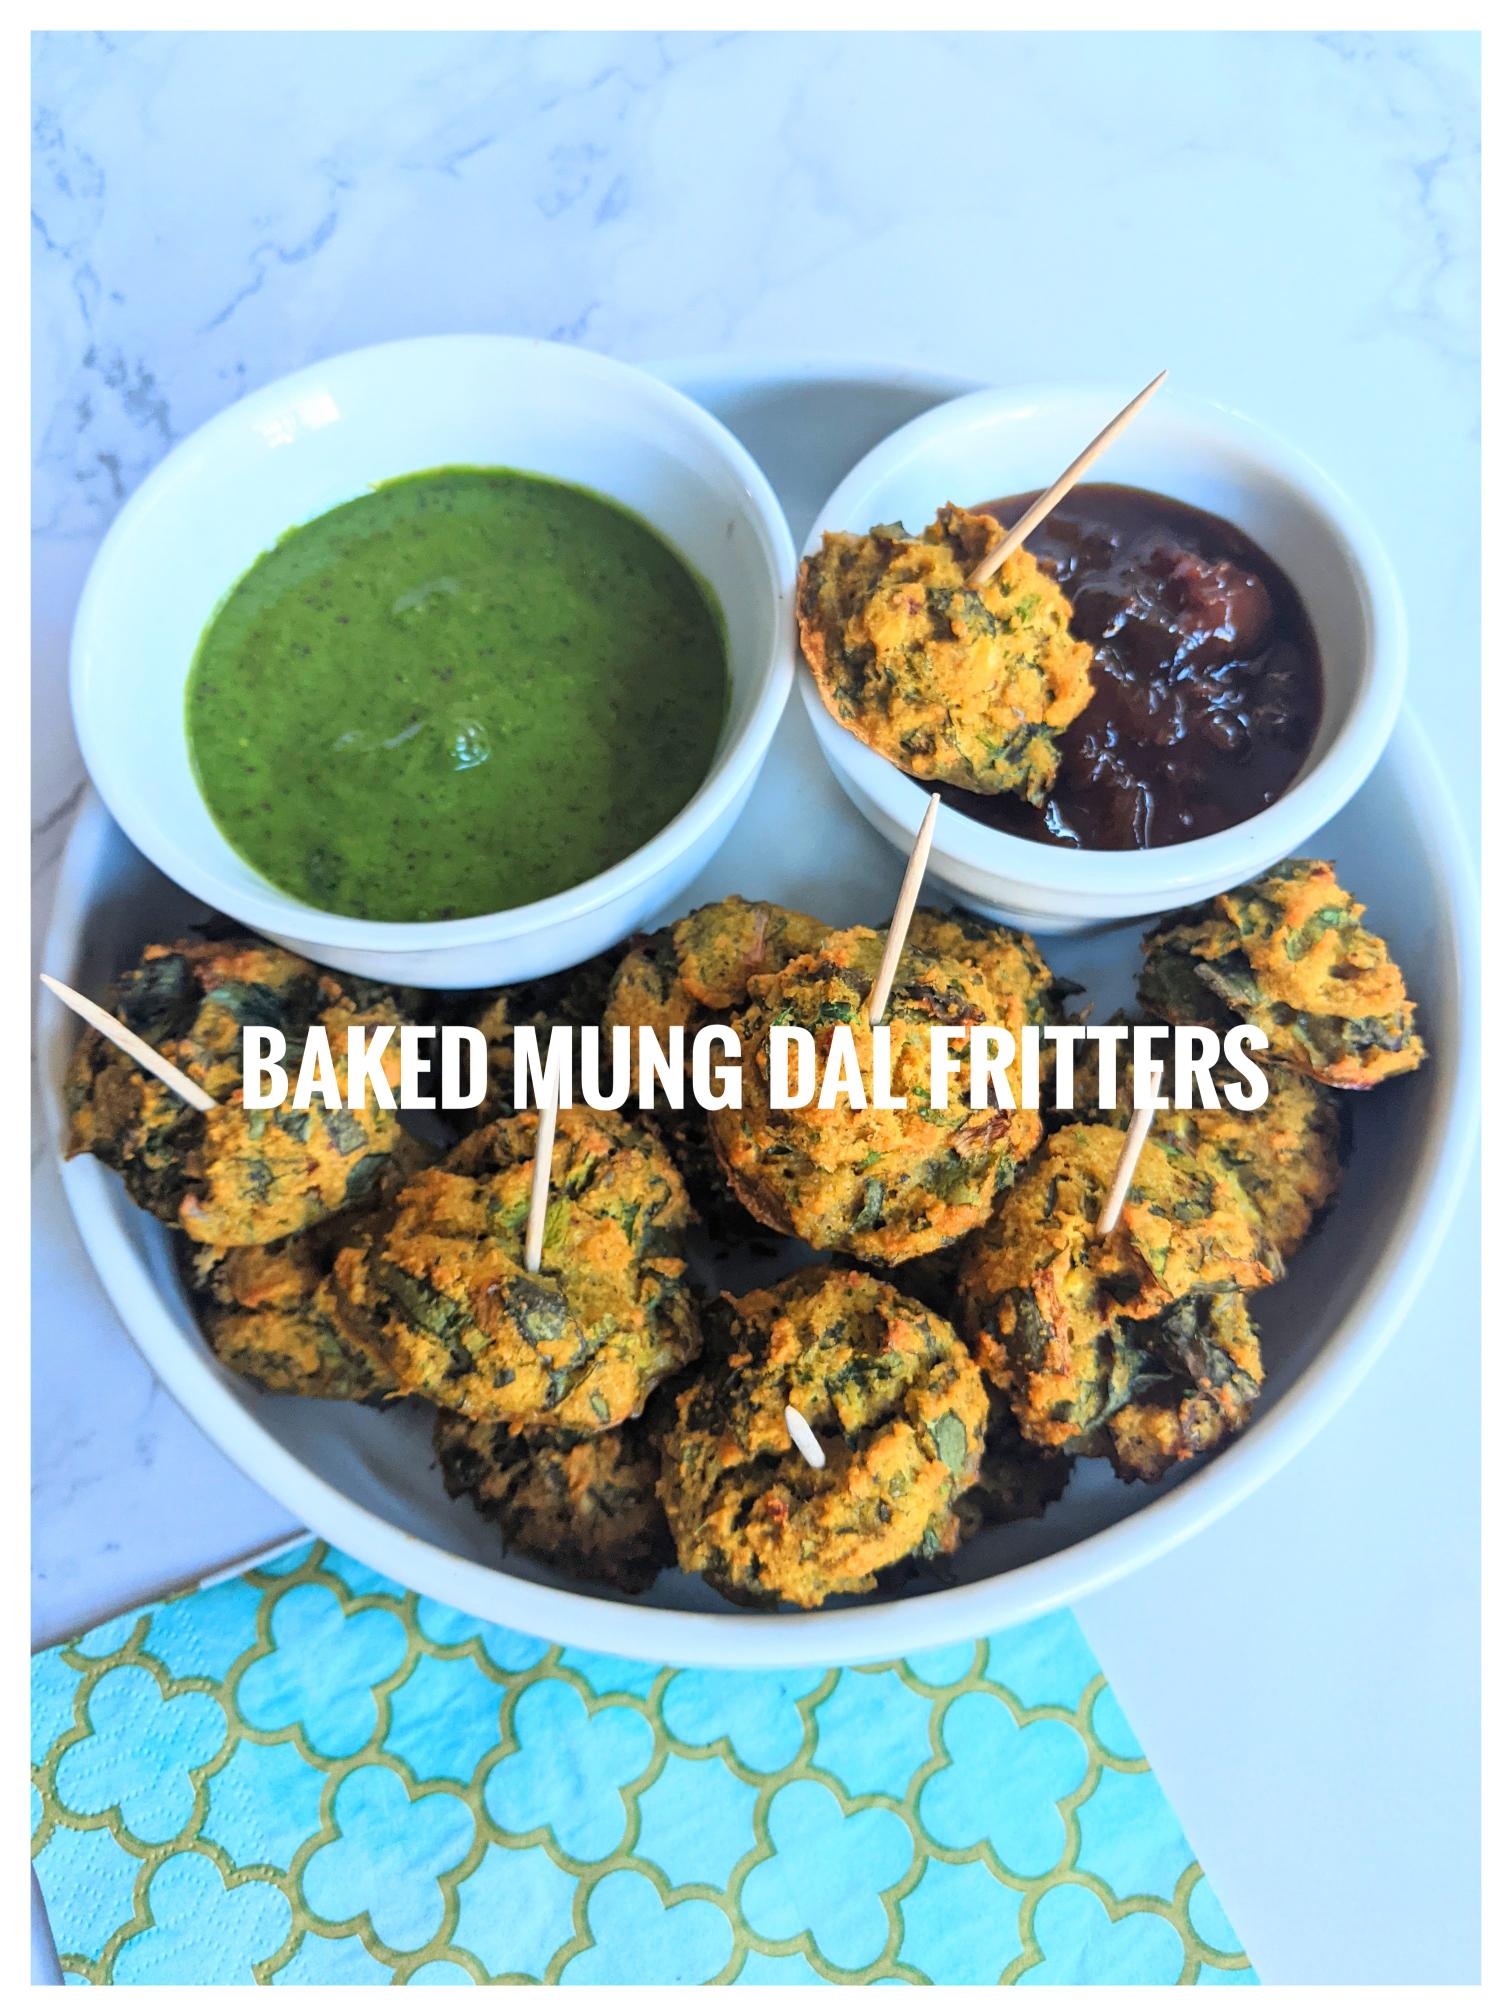 Baked Mung dal fritters